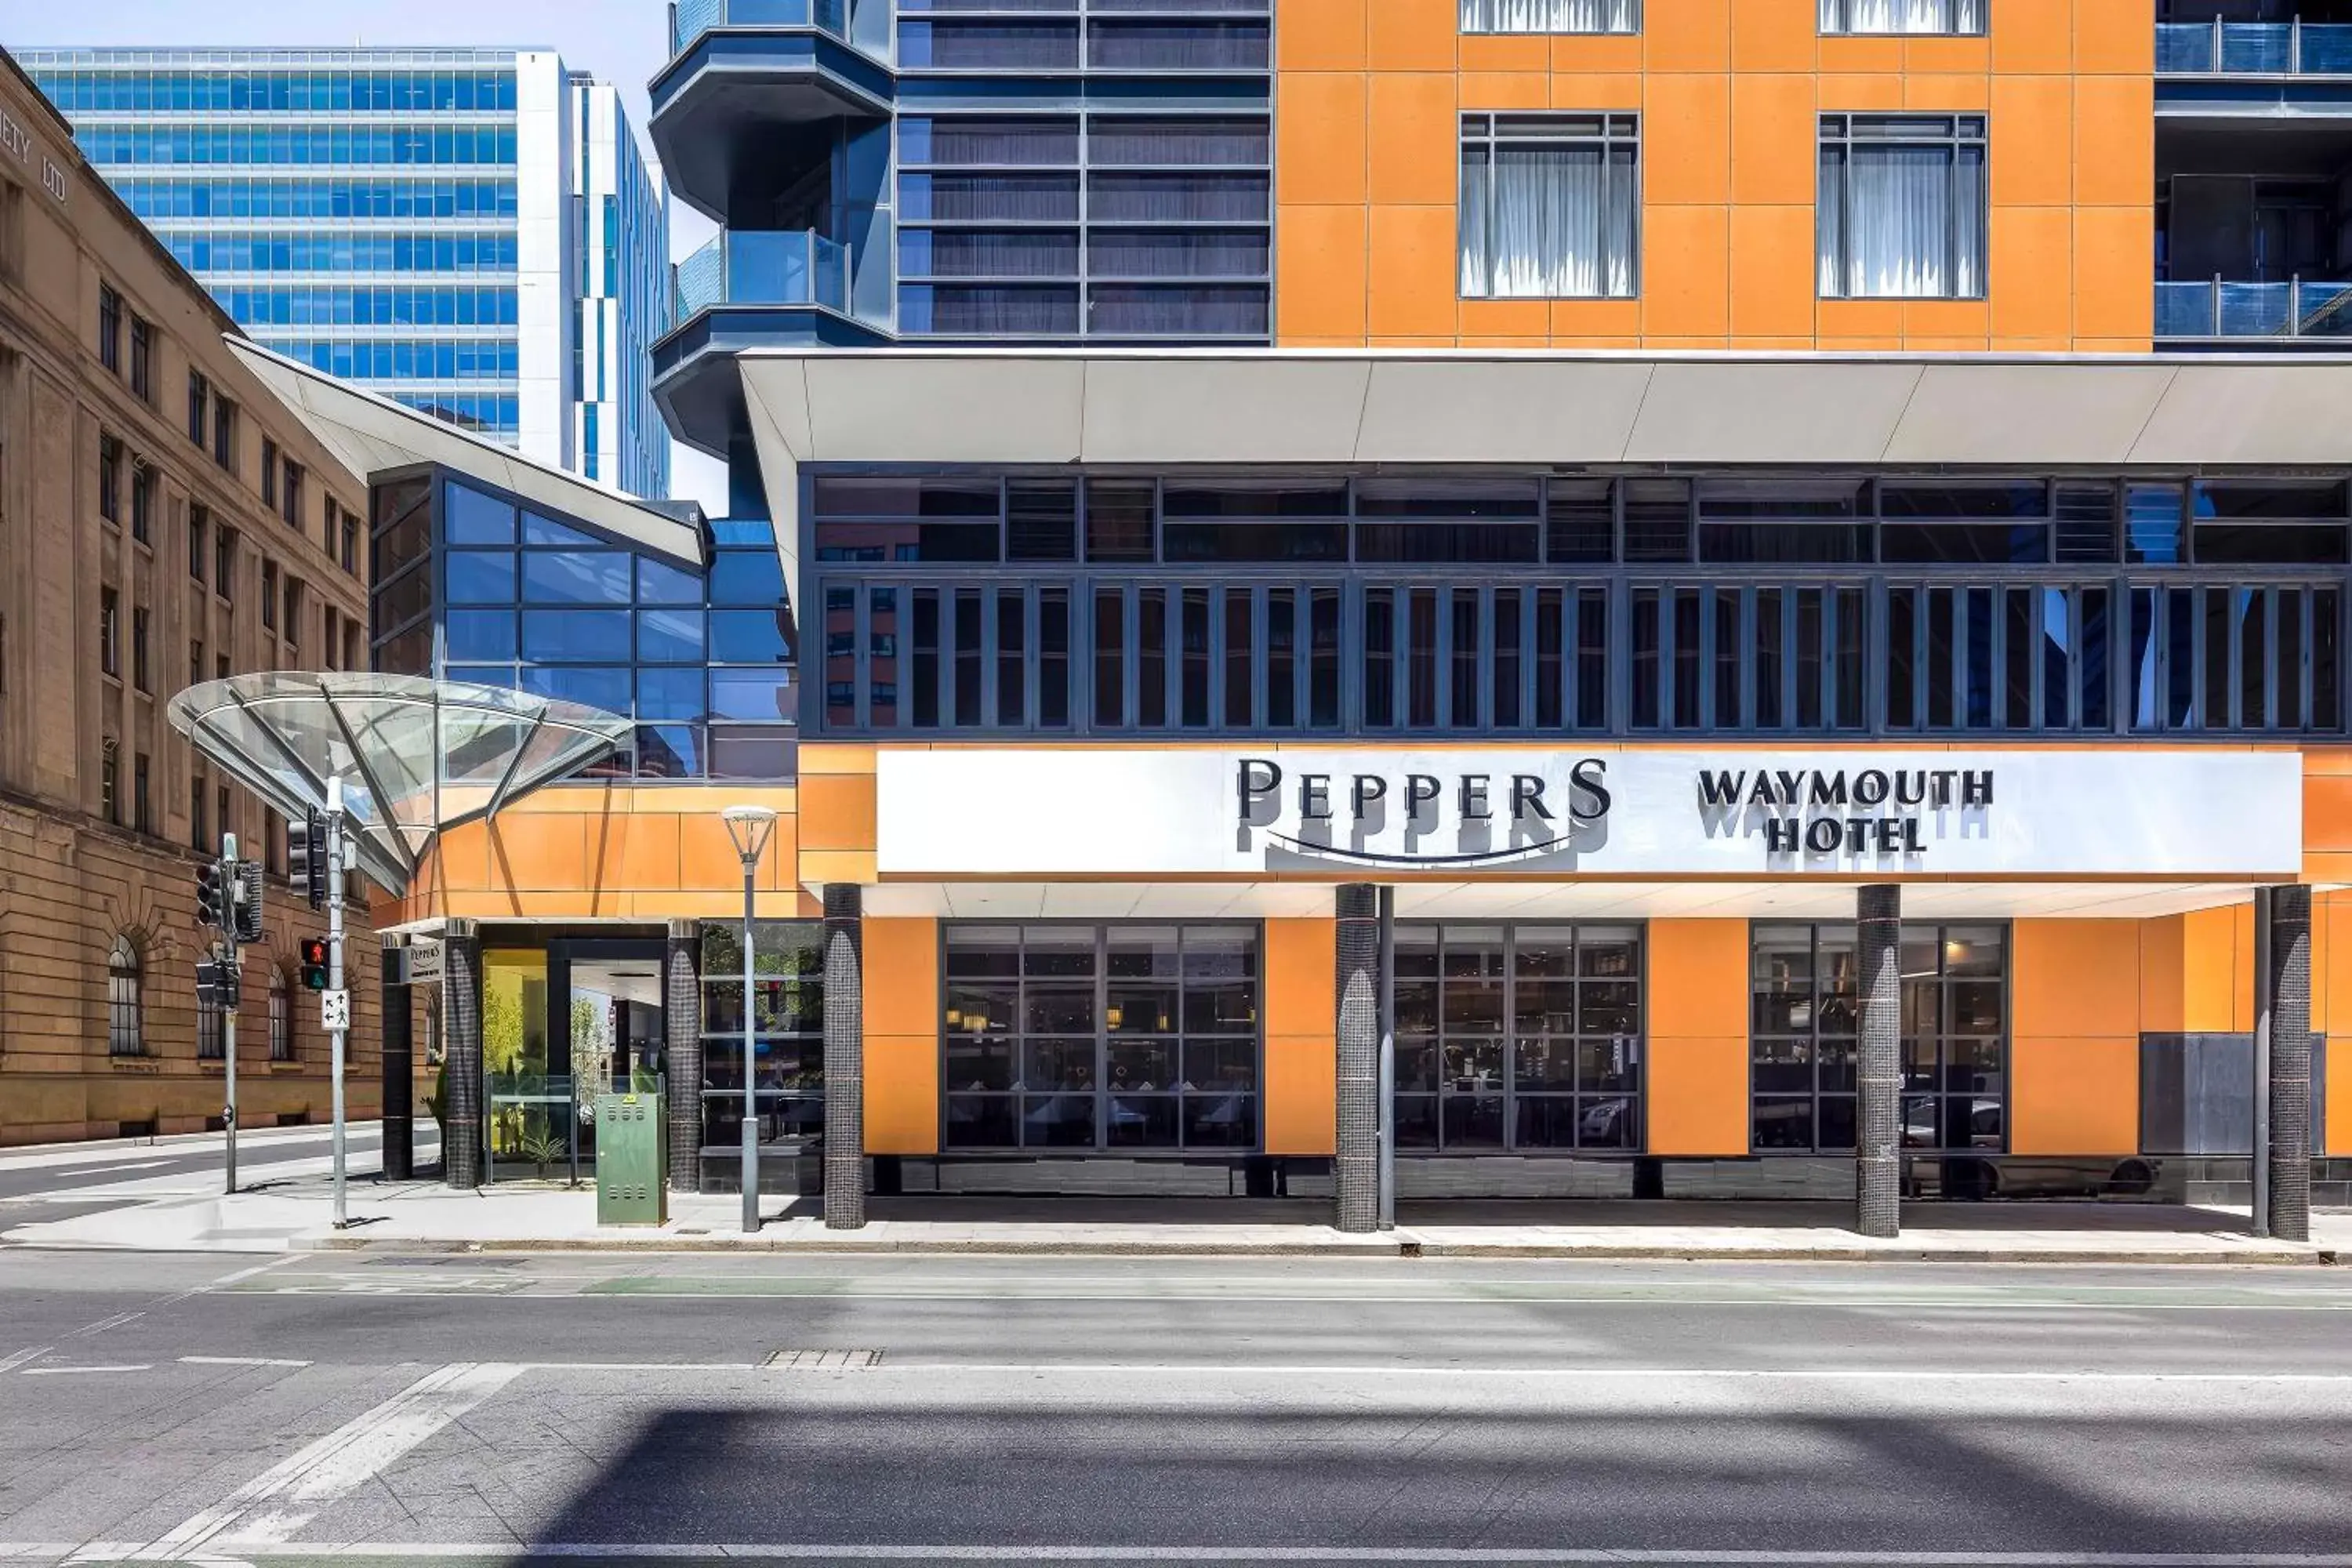 Property Building in Peppers Waymouth Hotel